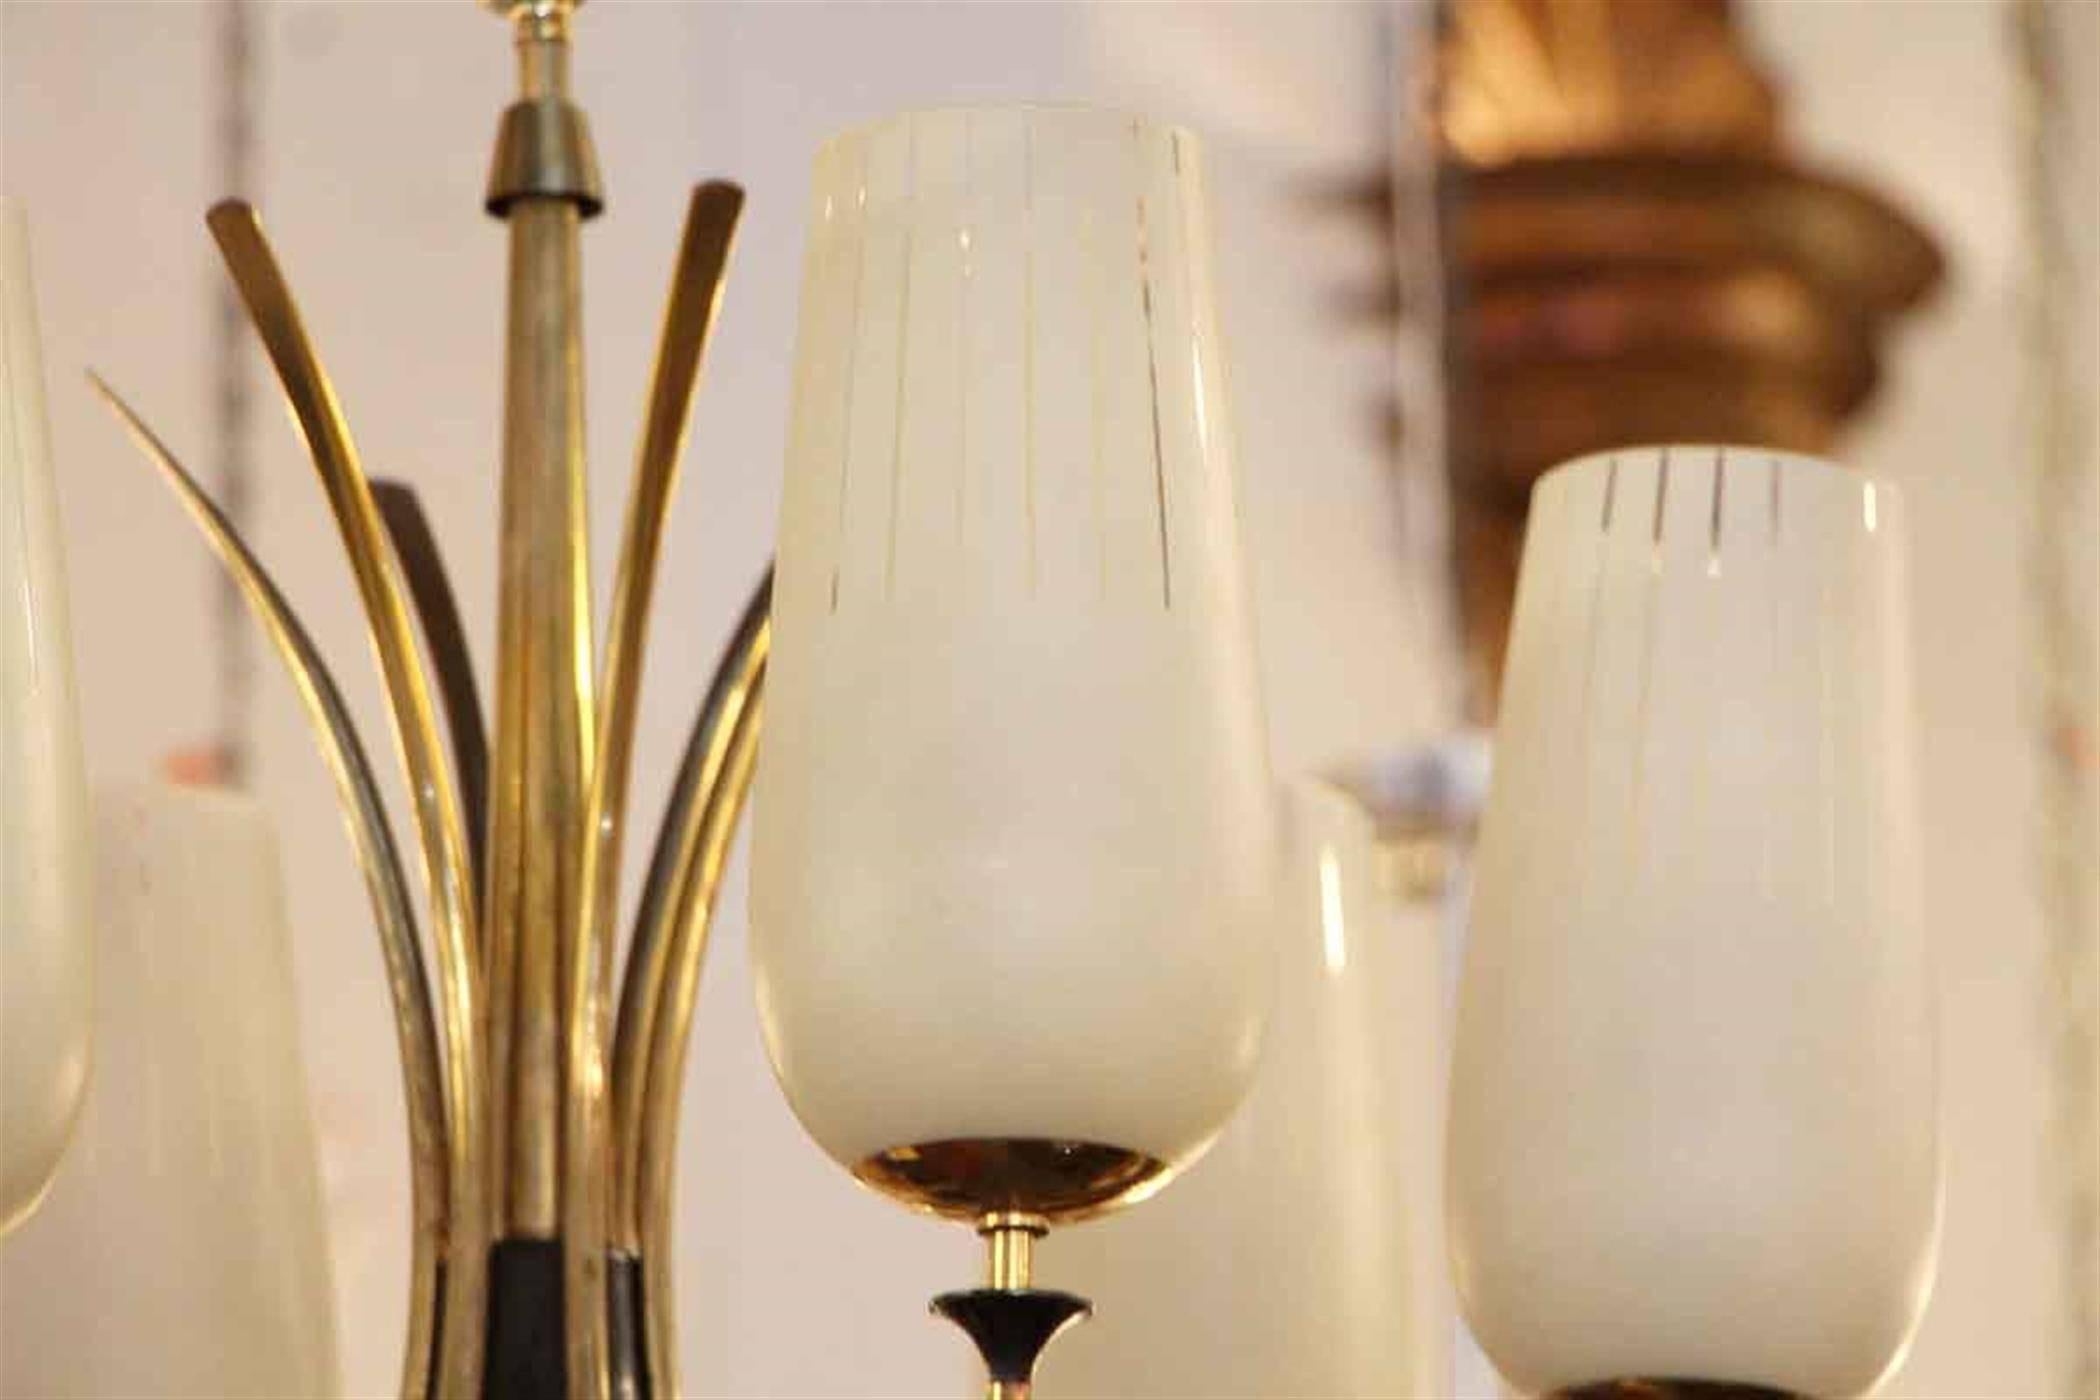 1960s Mid-Century Modern six-arm chandelier with white and clear stripe shades. Shown in a polished brass finish. This can be seen at our 2420 Broadway location on the upper west side in Manhattan.